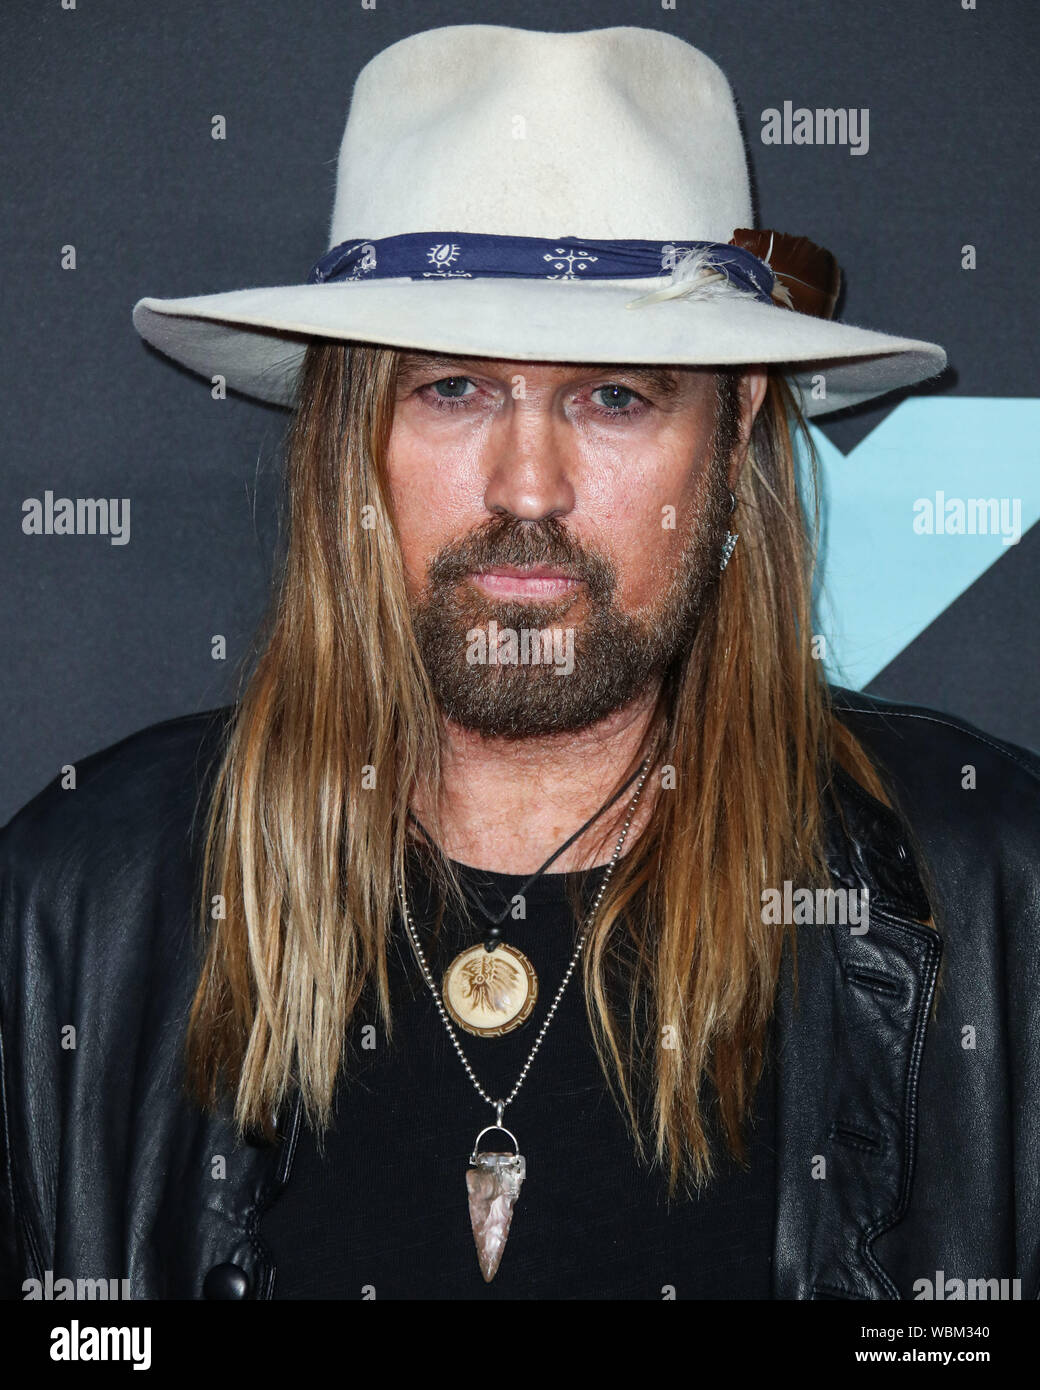 Newark, United States. 26th Aug, 2019. NEWARK, NEW JERSEY, USA - AUGUST 26: Billy Ray Cyrus arrives at the 2019 MTV Video Music Awards held at the Prudential Center on August 26, 2019 in Newark, New Jersey, United States. Credit: Image Press Agency/Alamy Live News Stock Photo